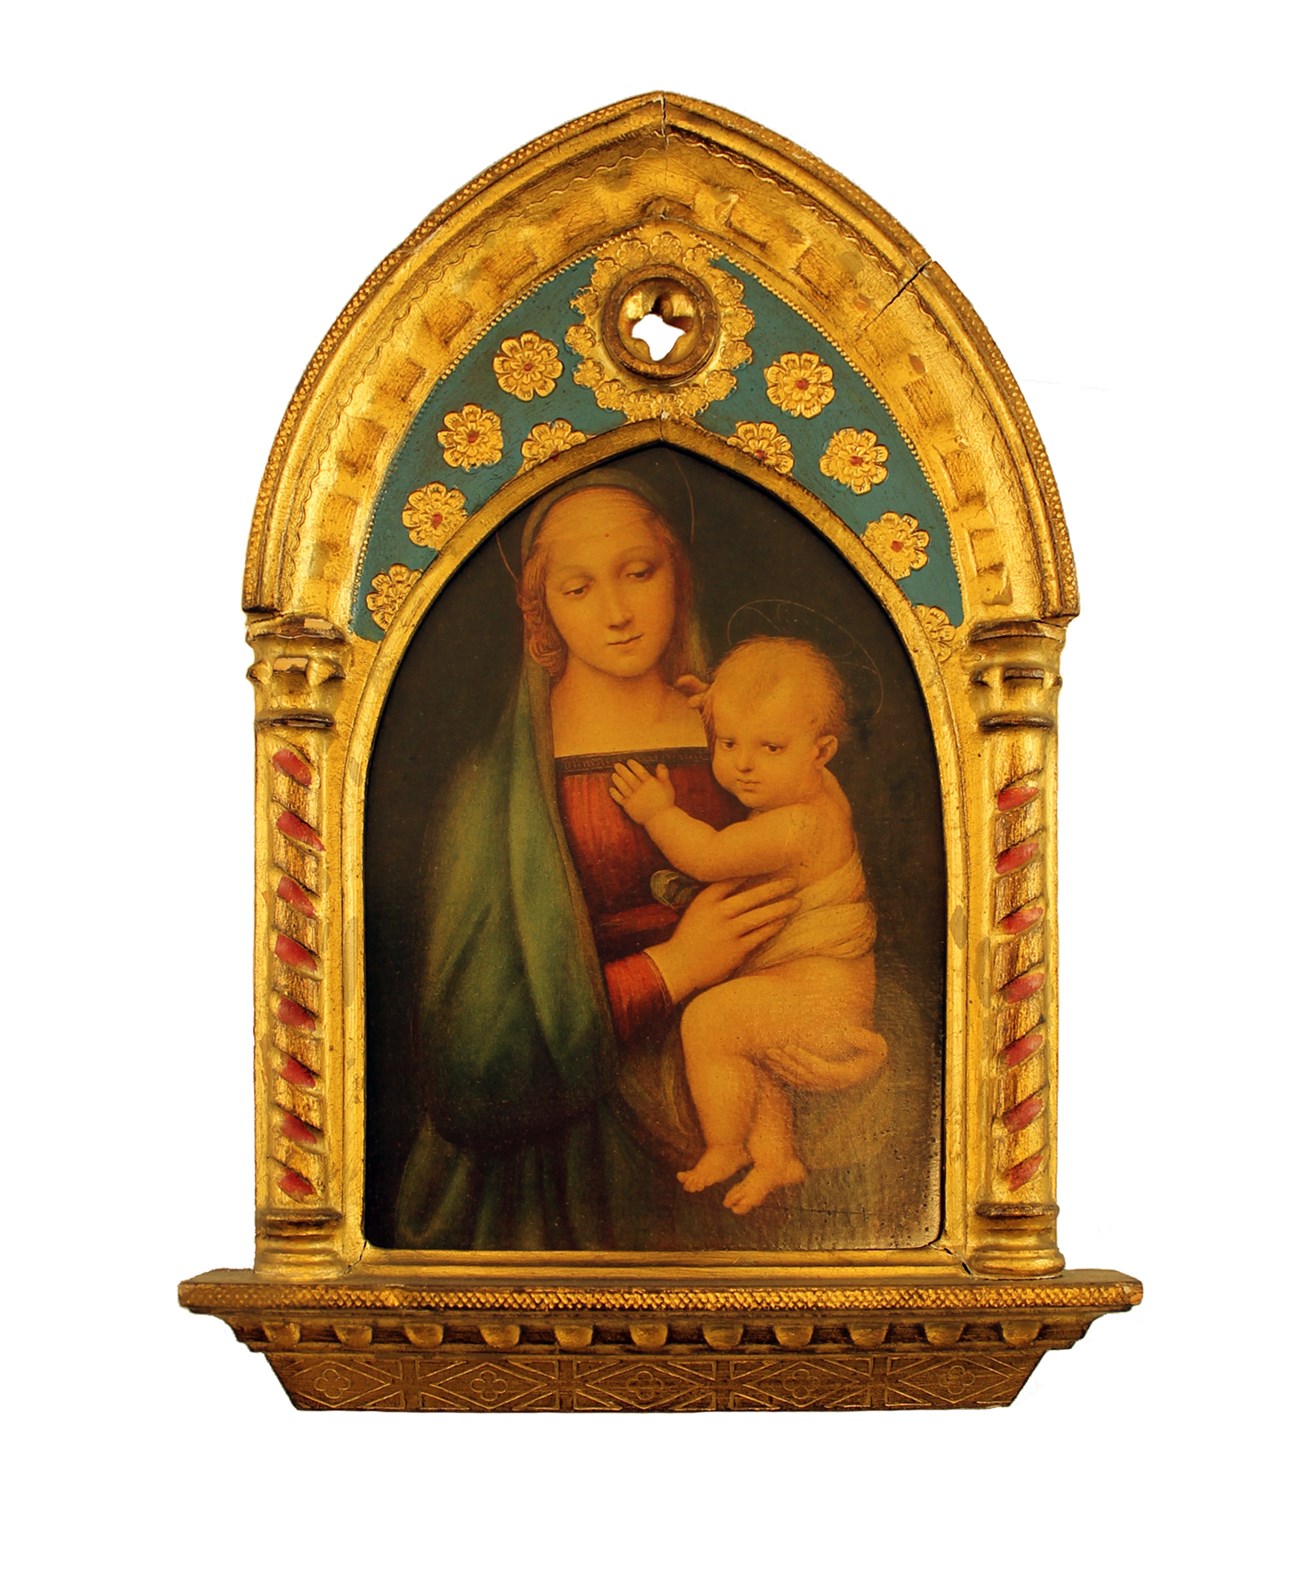 portrait of woman and baby in an elaborate gilt frame with pointed arch shape